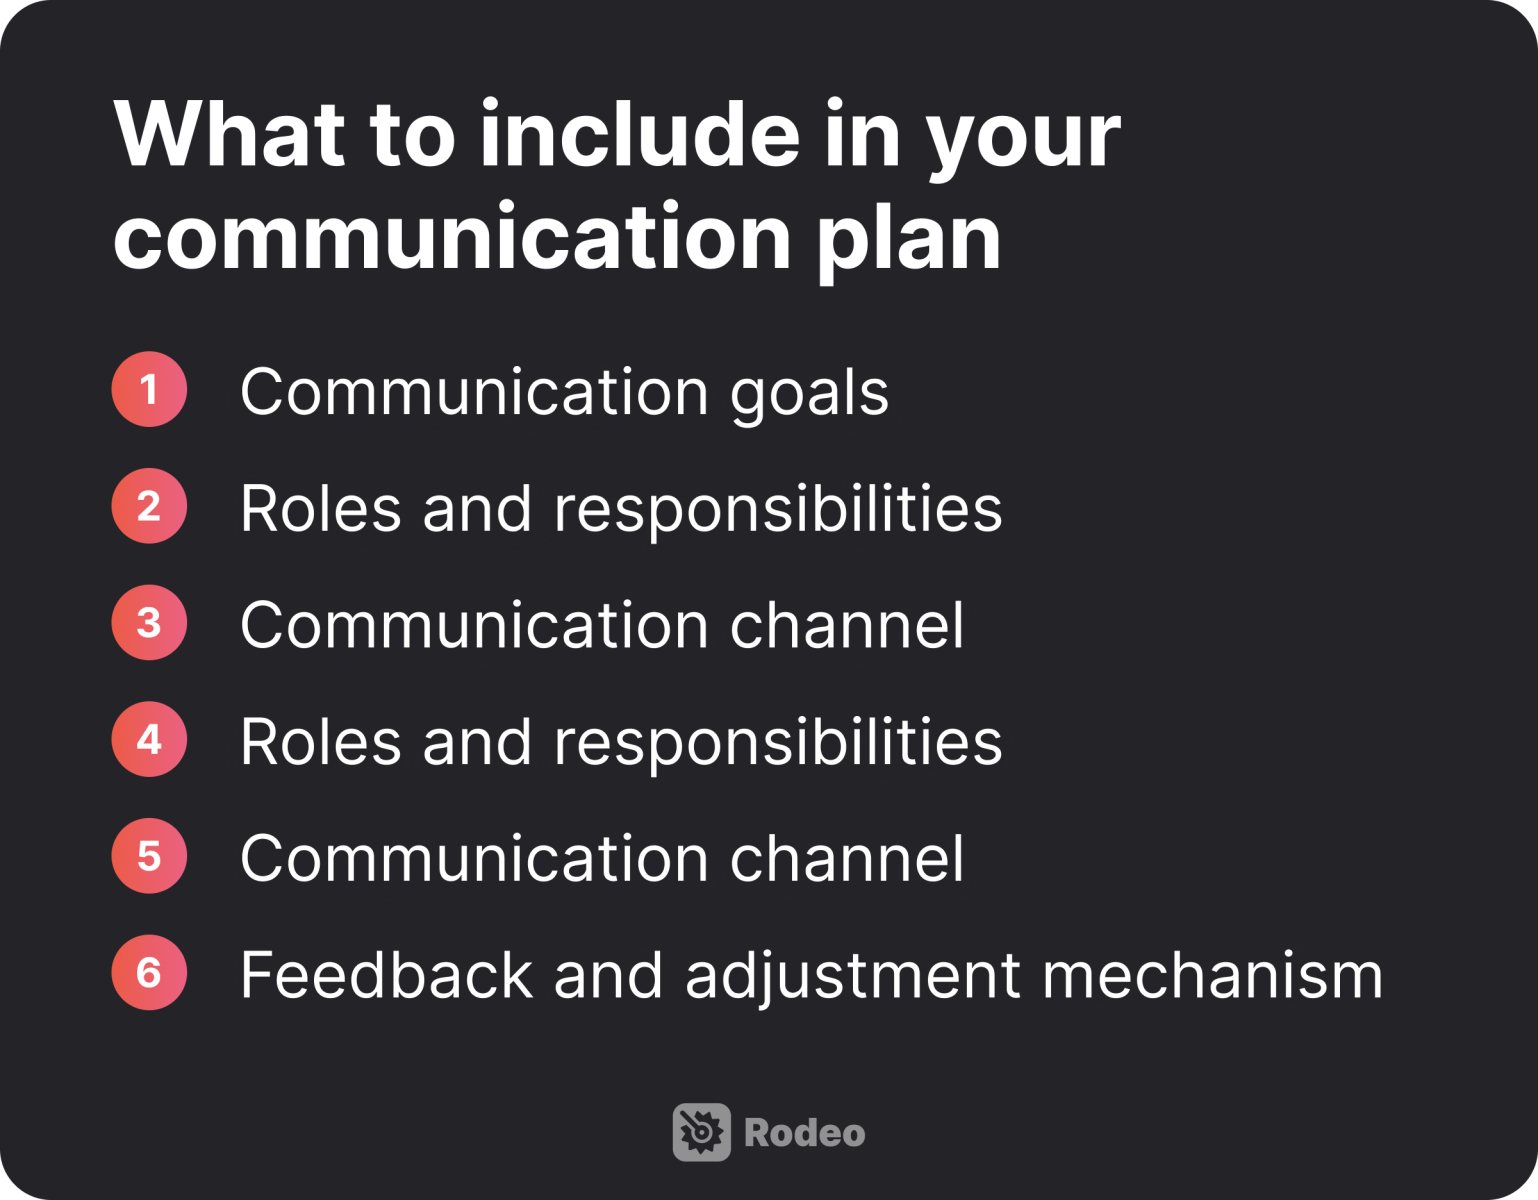 What to include in your communication plan graphic